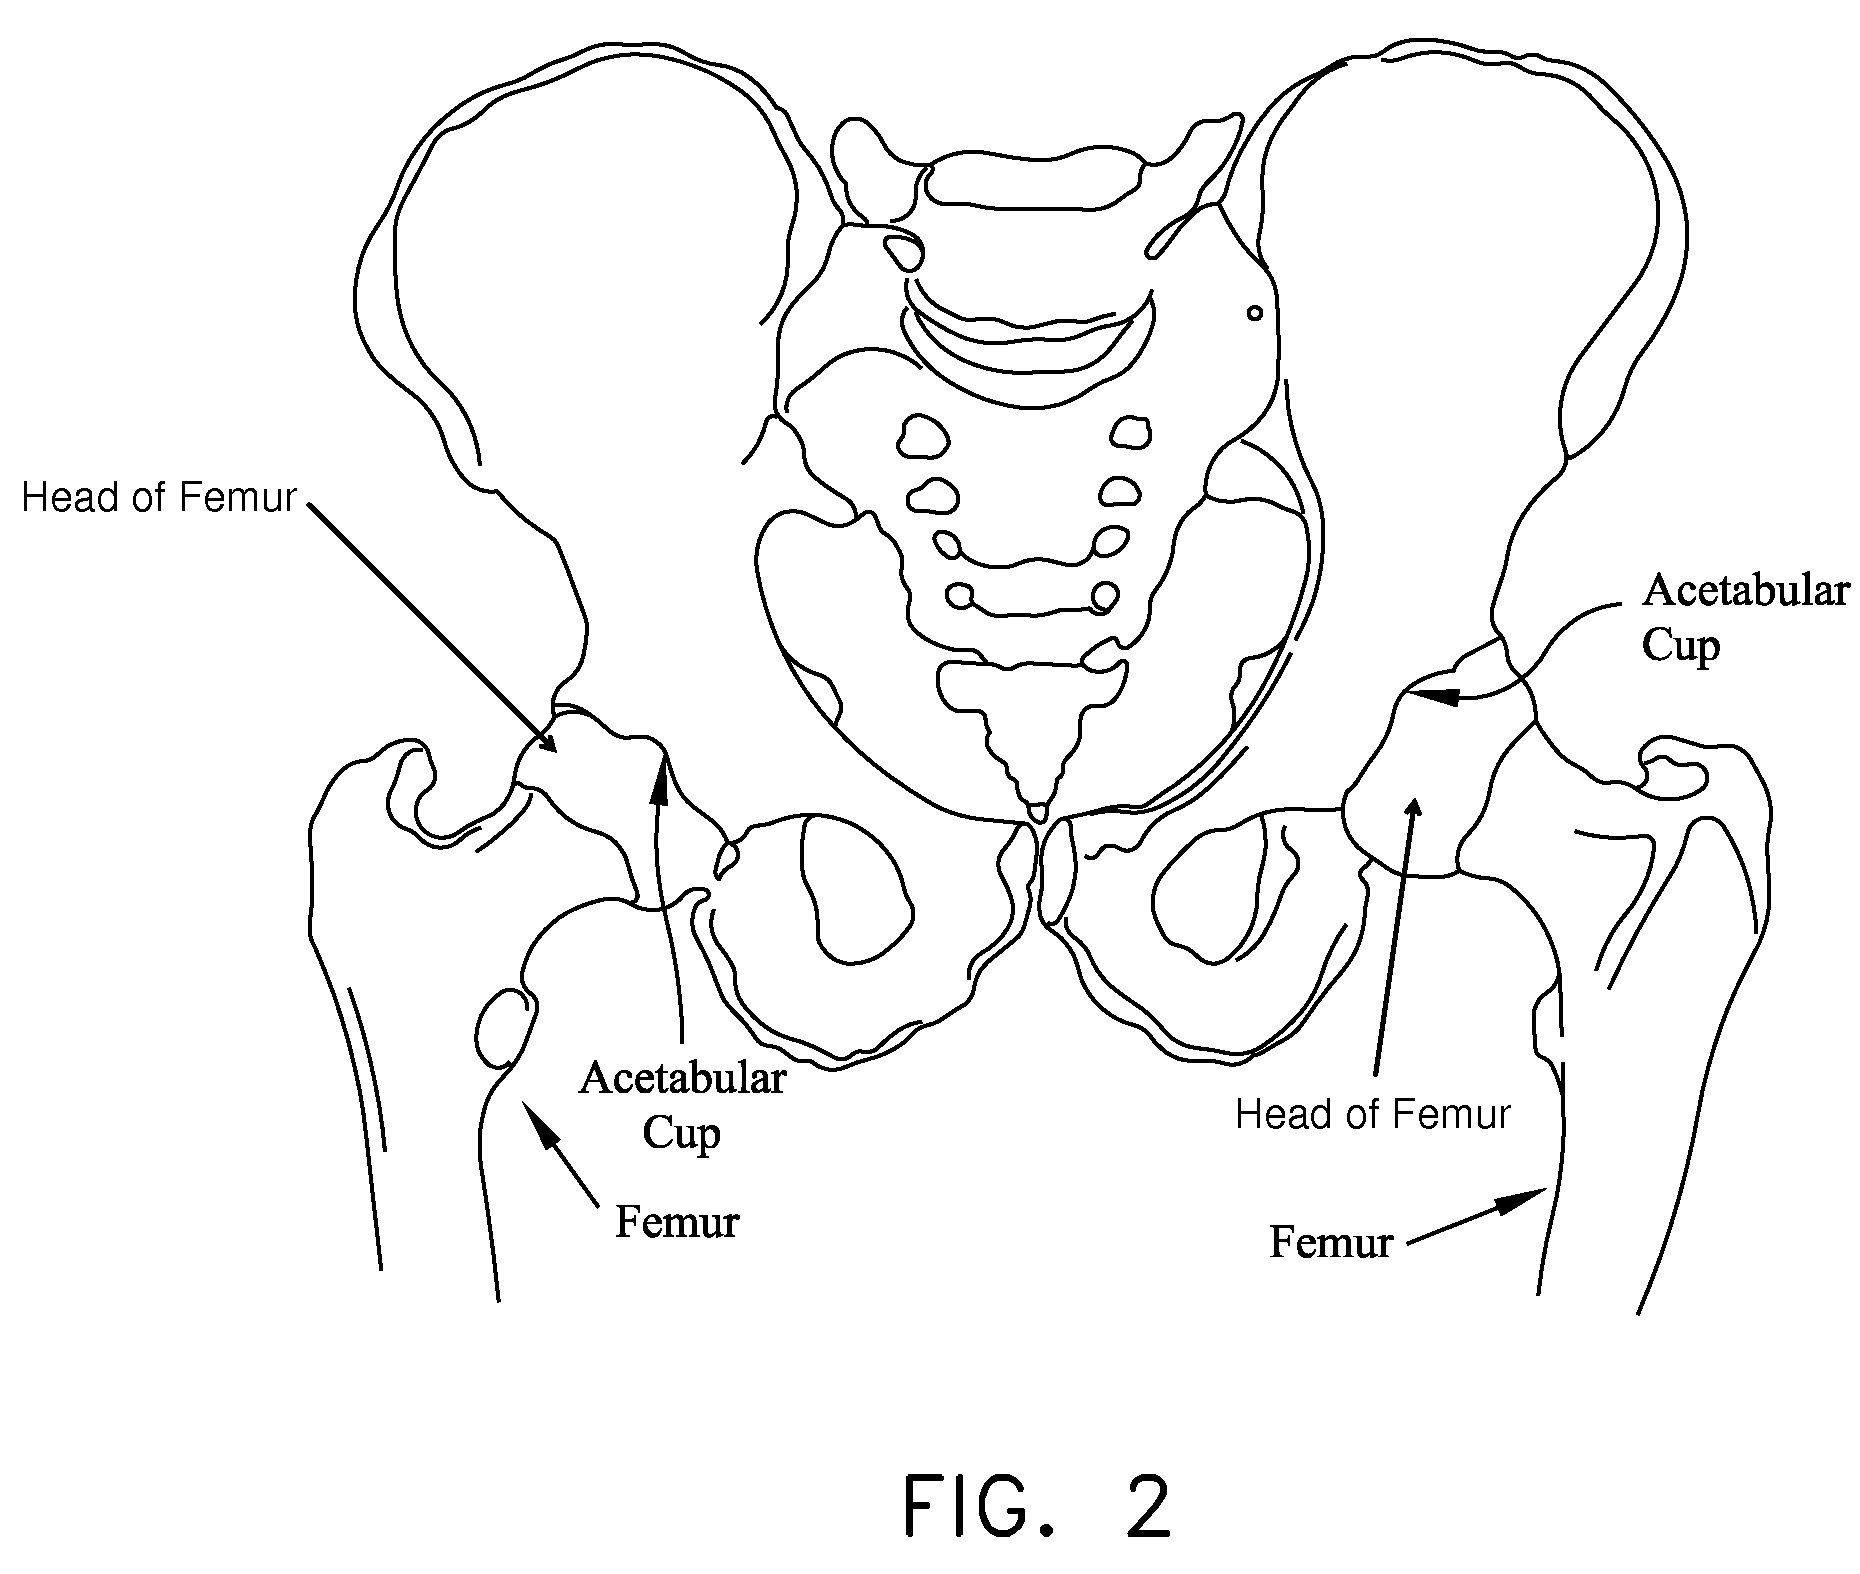 Method and apparatus for re-attaching the labrum to the acetabulum, including the provision and use of a novel suture anchor system